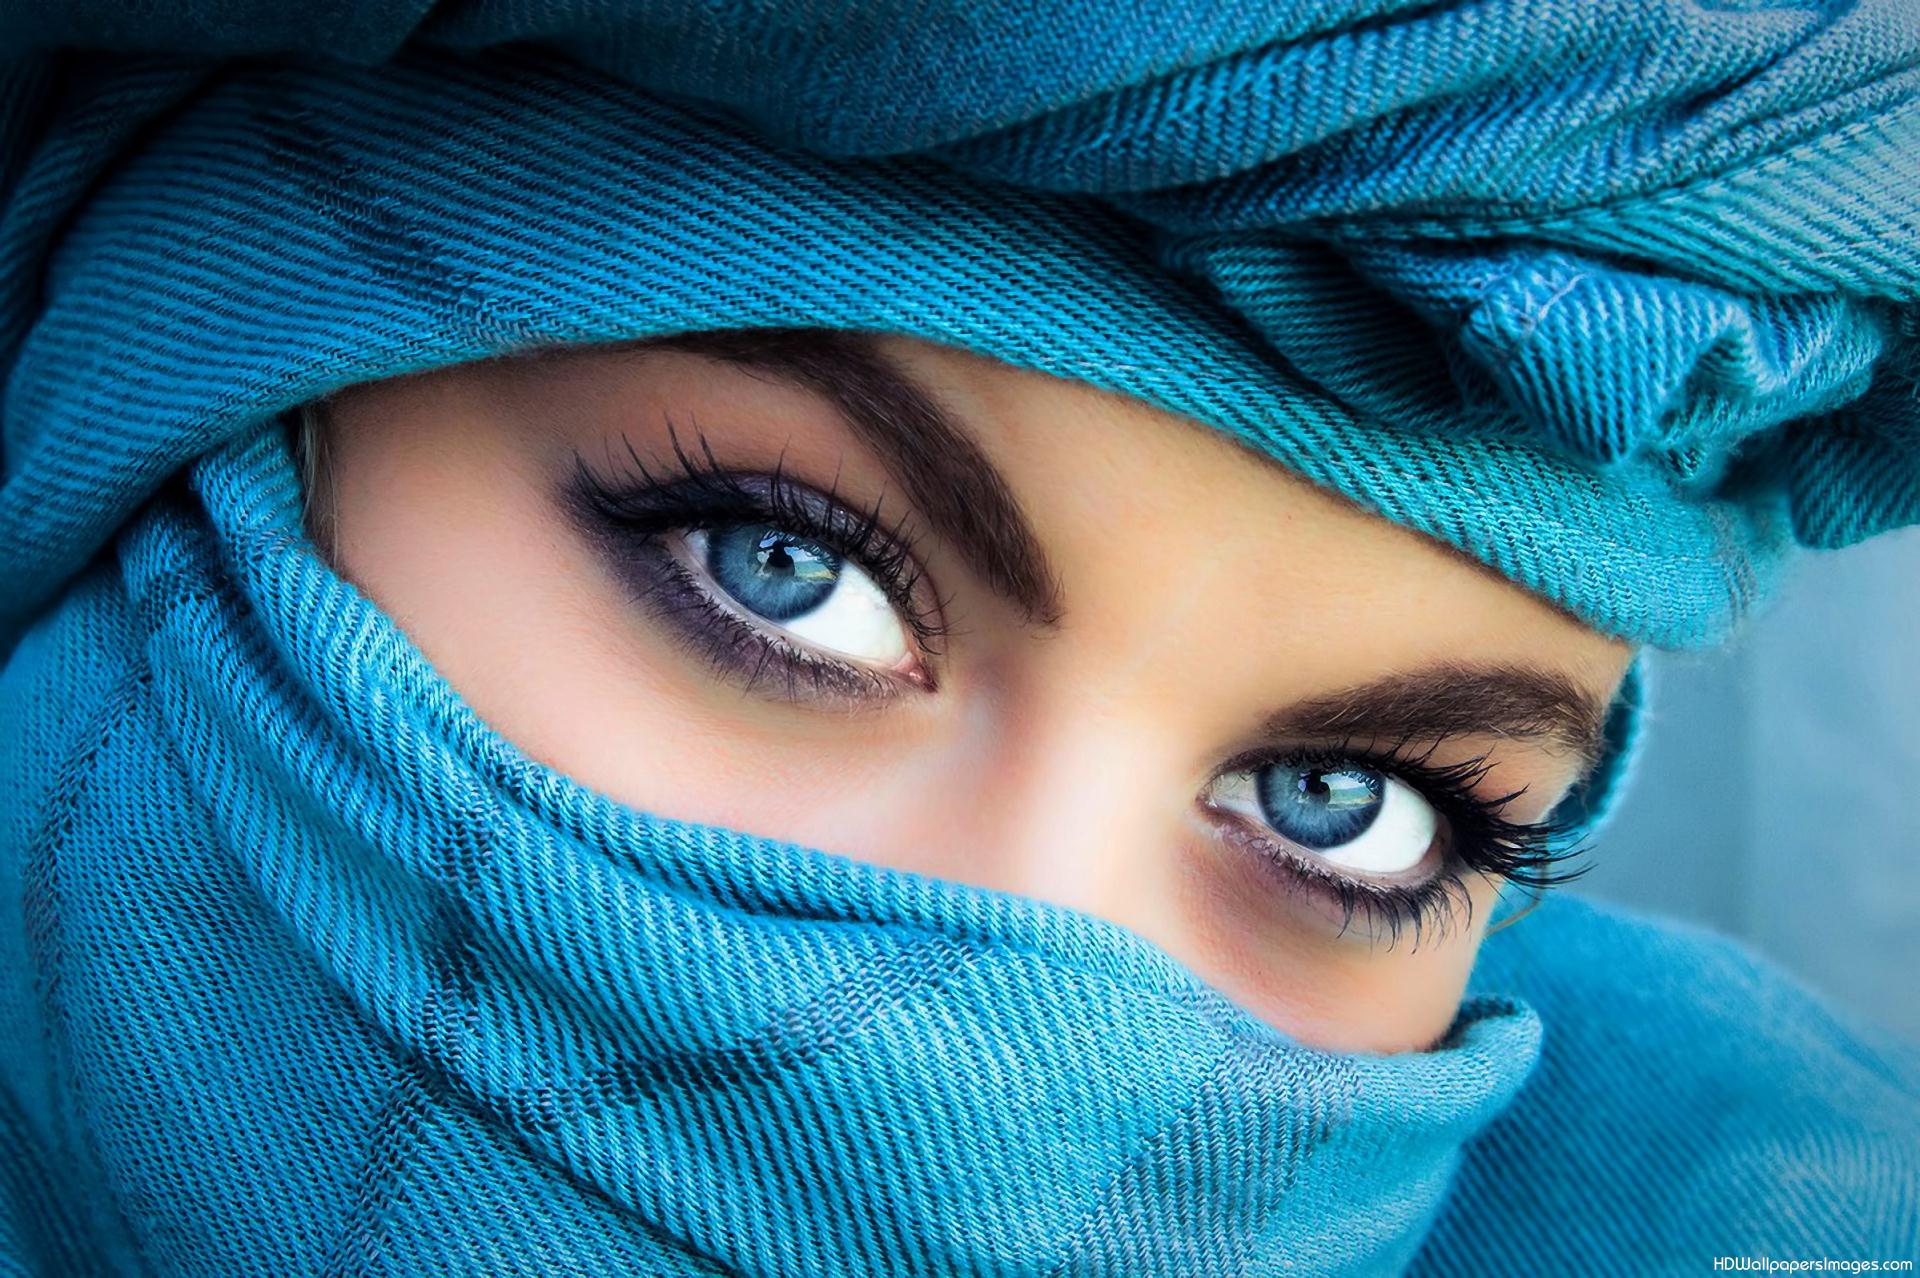 Most Beautiful Eyes HQ Wallpapers Worlds Greatest Art Site